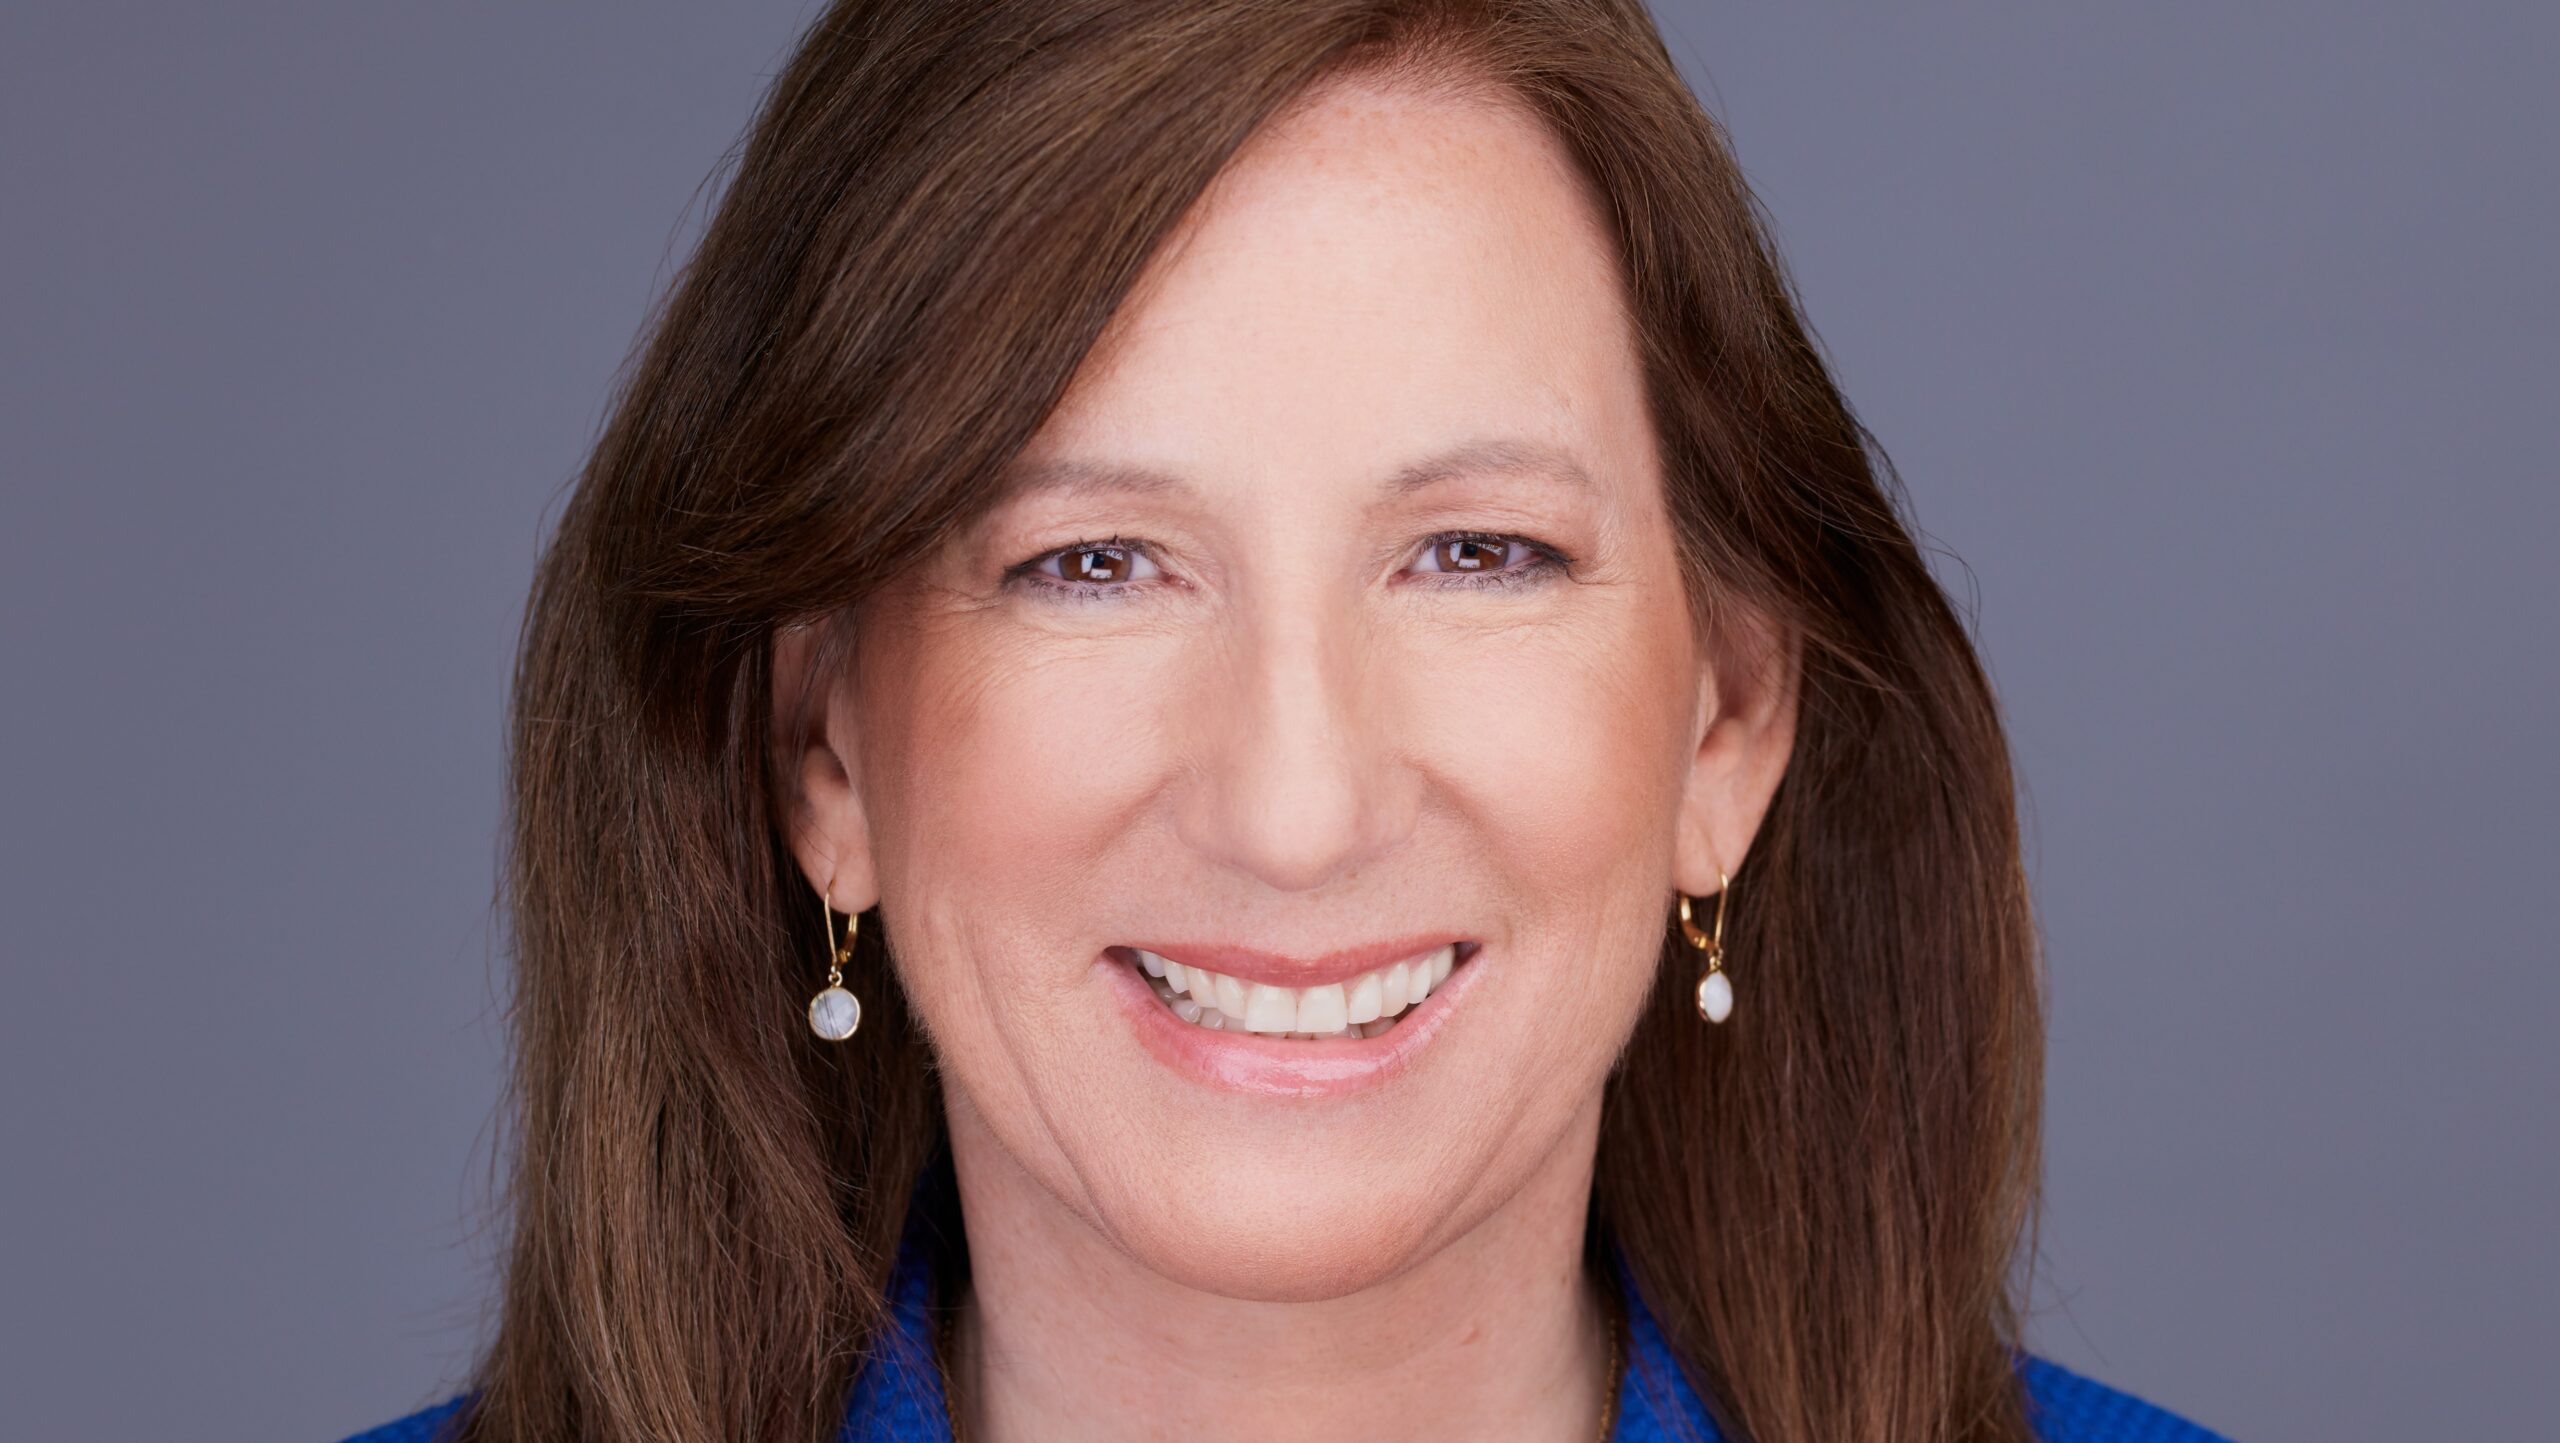 Deloitte CEO, Cathy Engelbert, appointed Commissioner of the WNBA